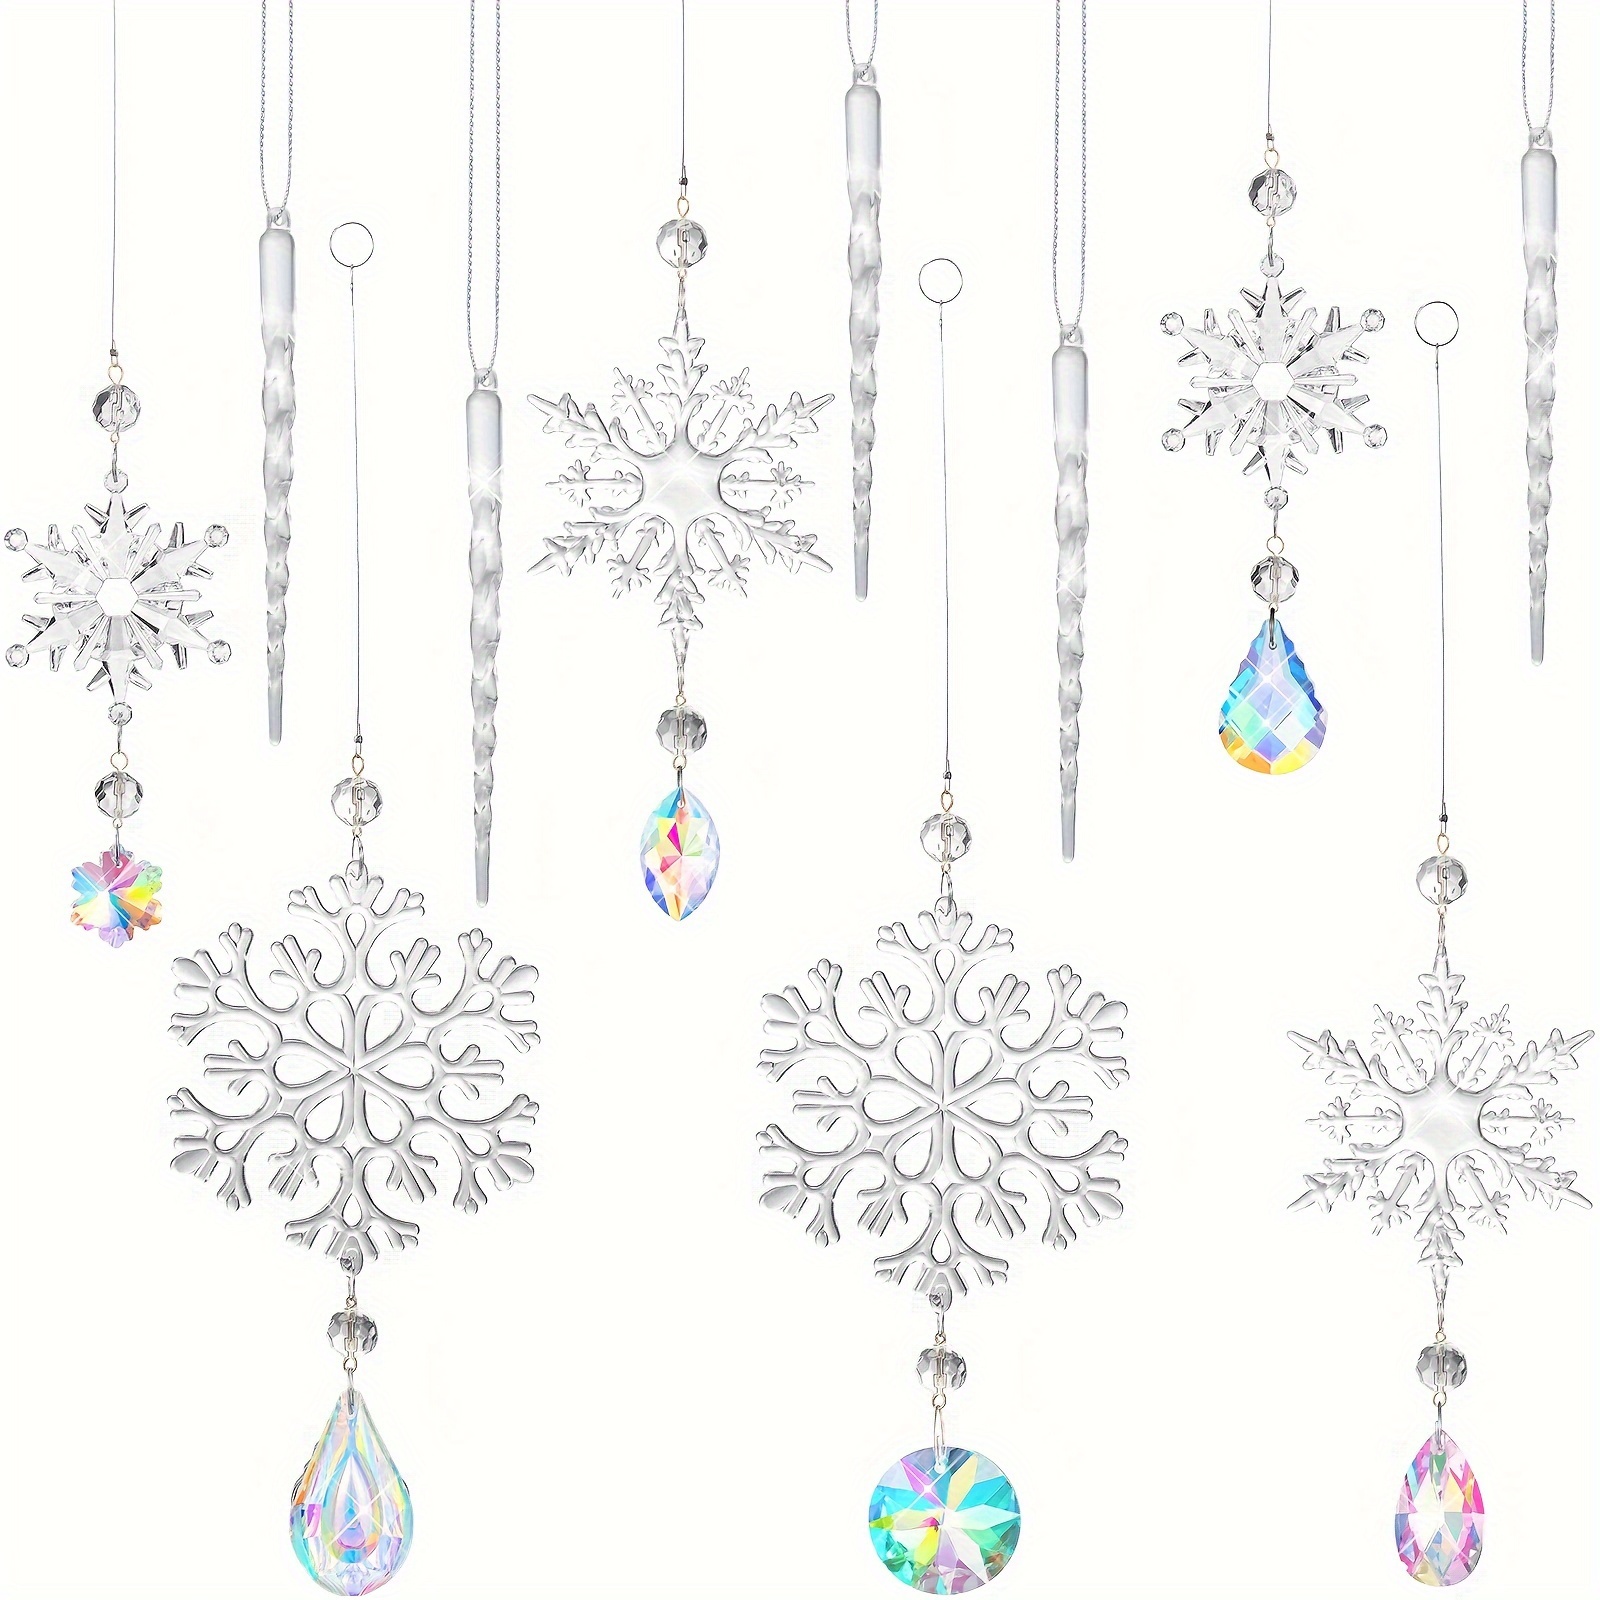 

12 Pieces Christmas Tree Decoration Ornament Acrylic Icicle Christmas Hanging Acrylic Crystal Snowflake Decoration Hanging Acrylic Snowflake For Christmas New Year Party Decor (colorful)